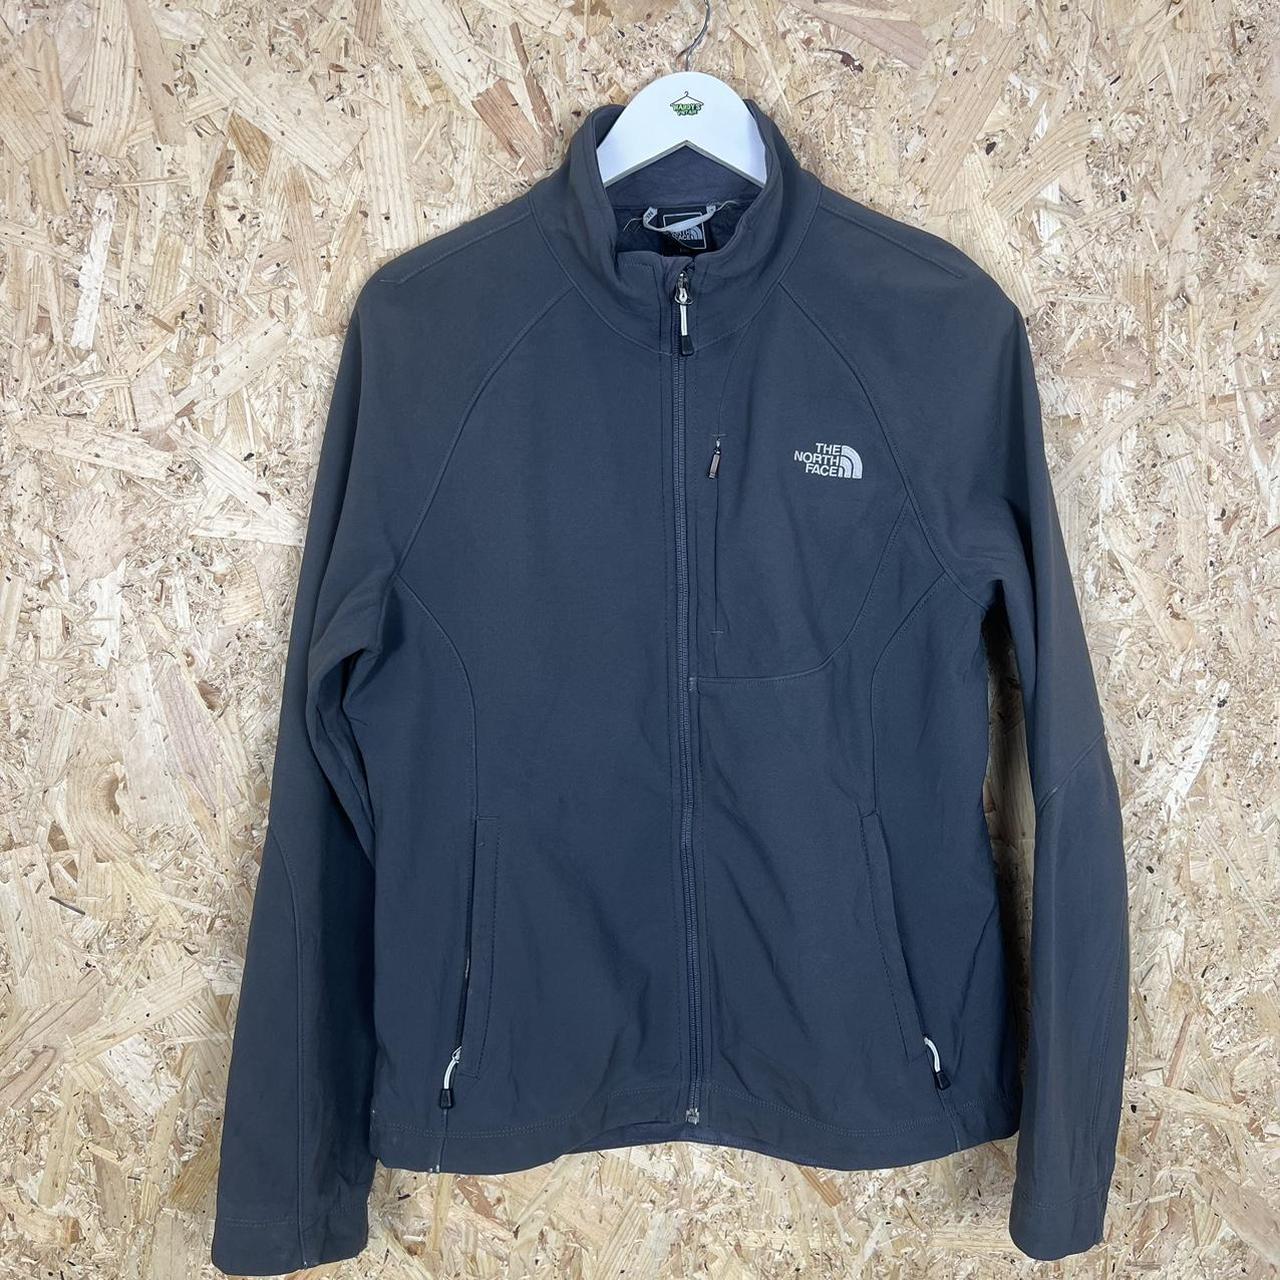 North face jacket women’s large